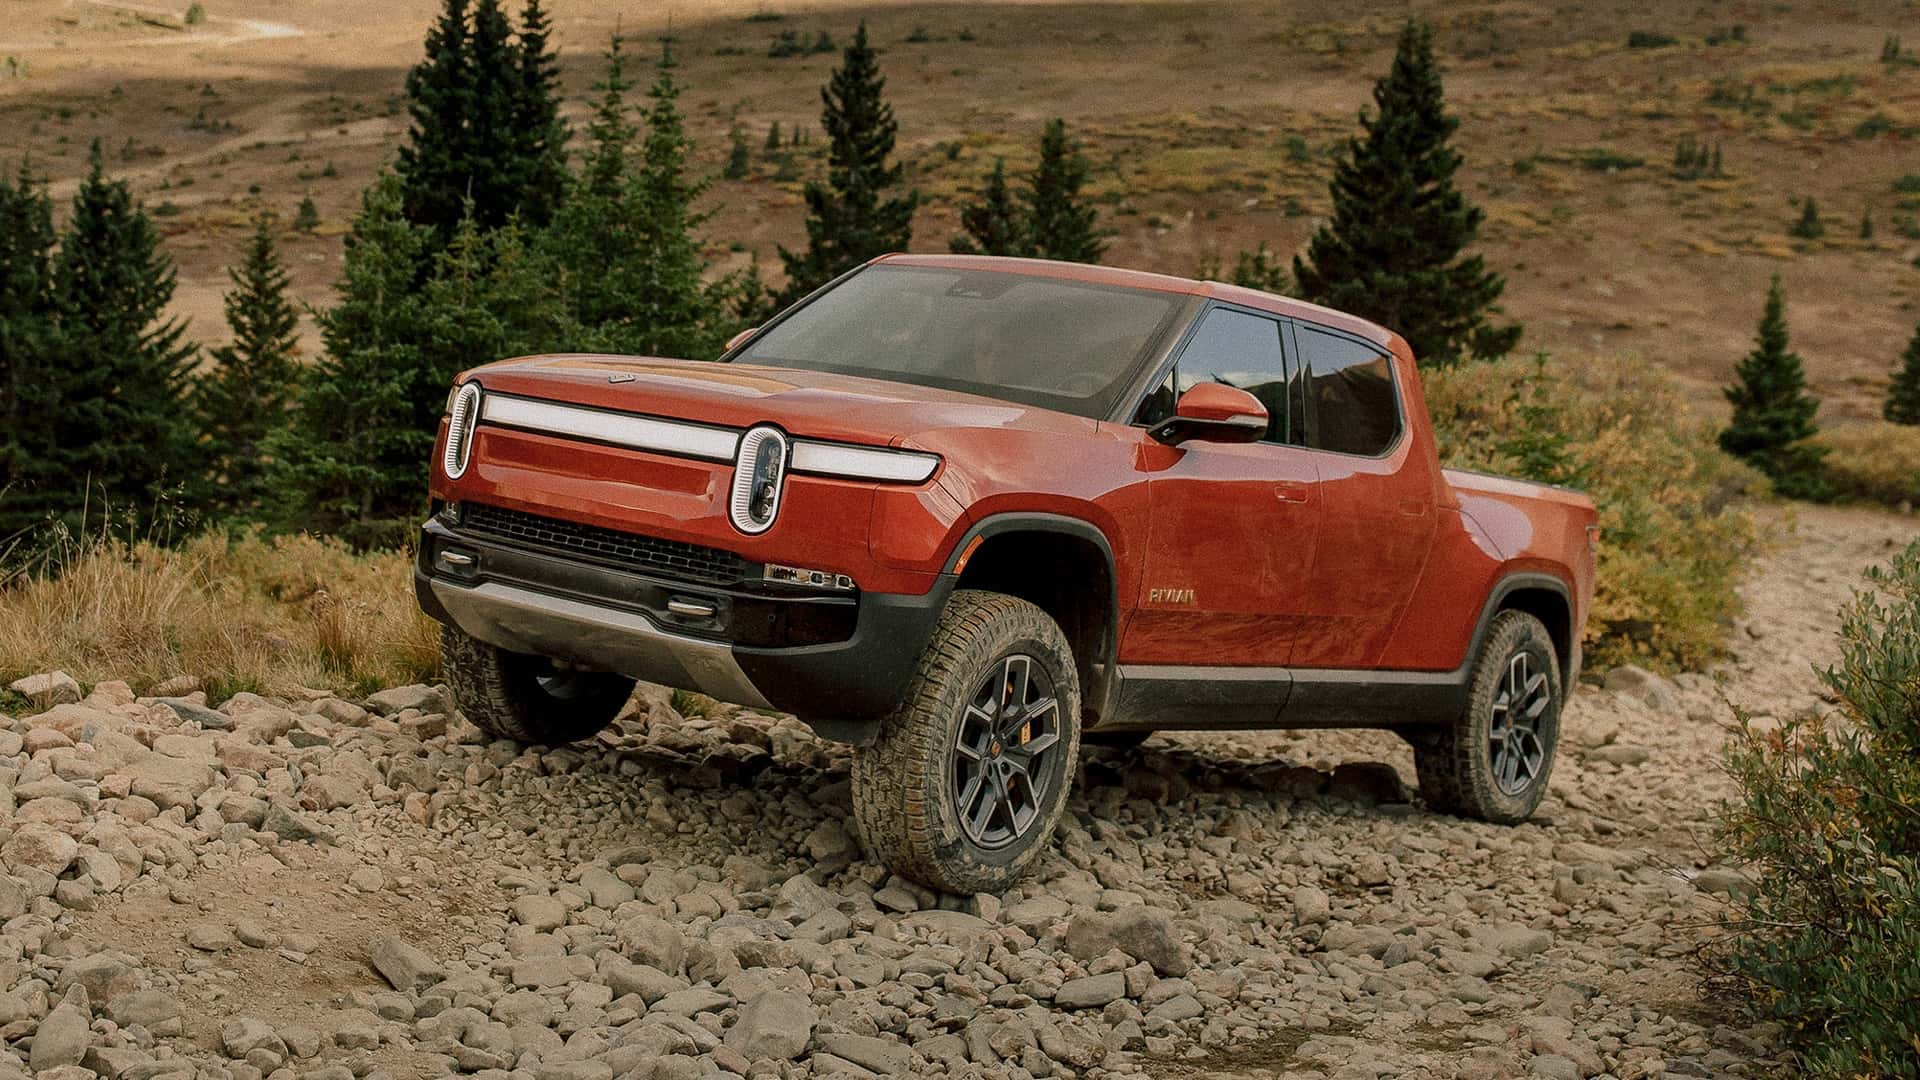 rivian r1t inventory shop goes live, delivery time as low as 1 week